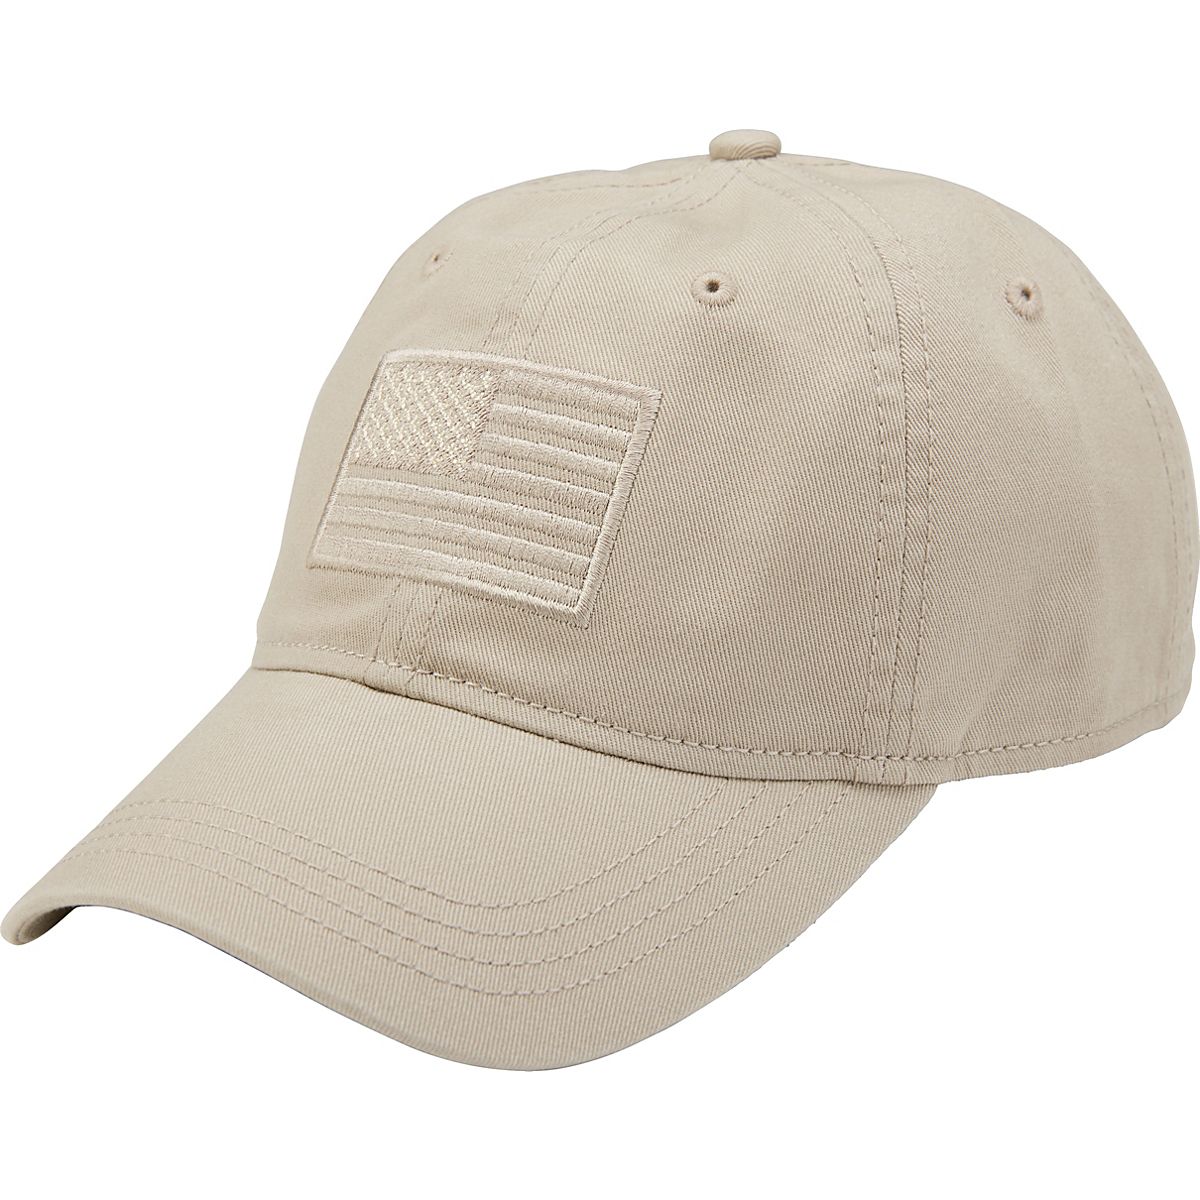 Academy Sports + Outdoors Men's Tonal American Flag Solid Twill Hat